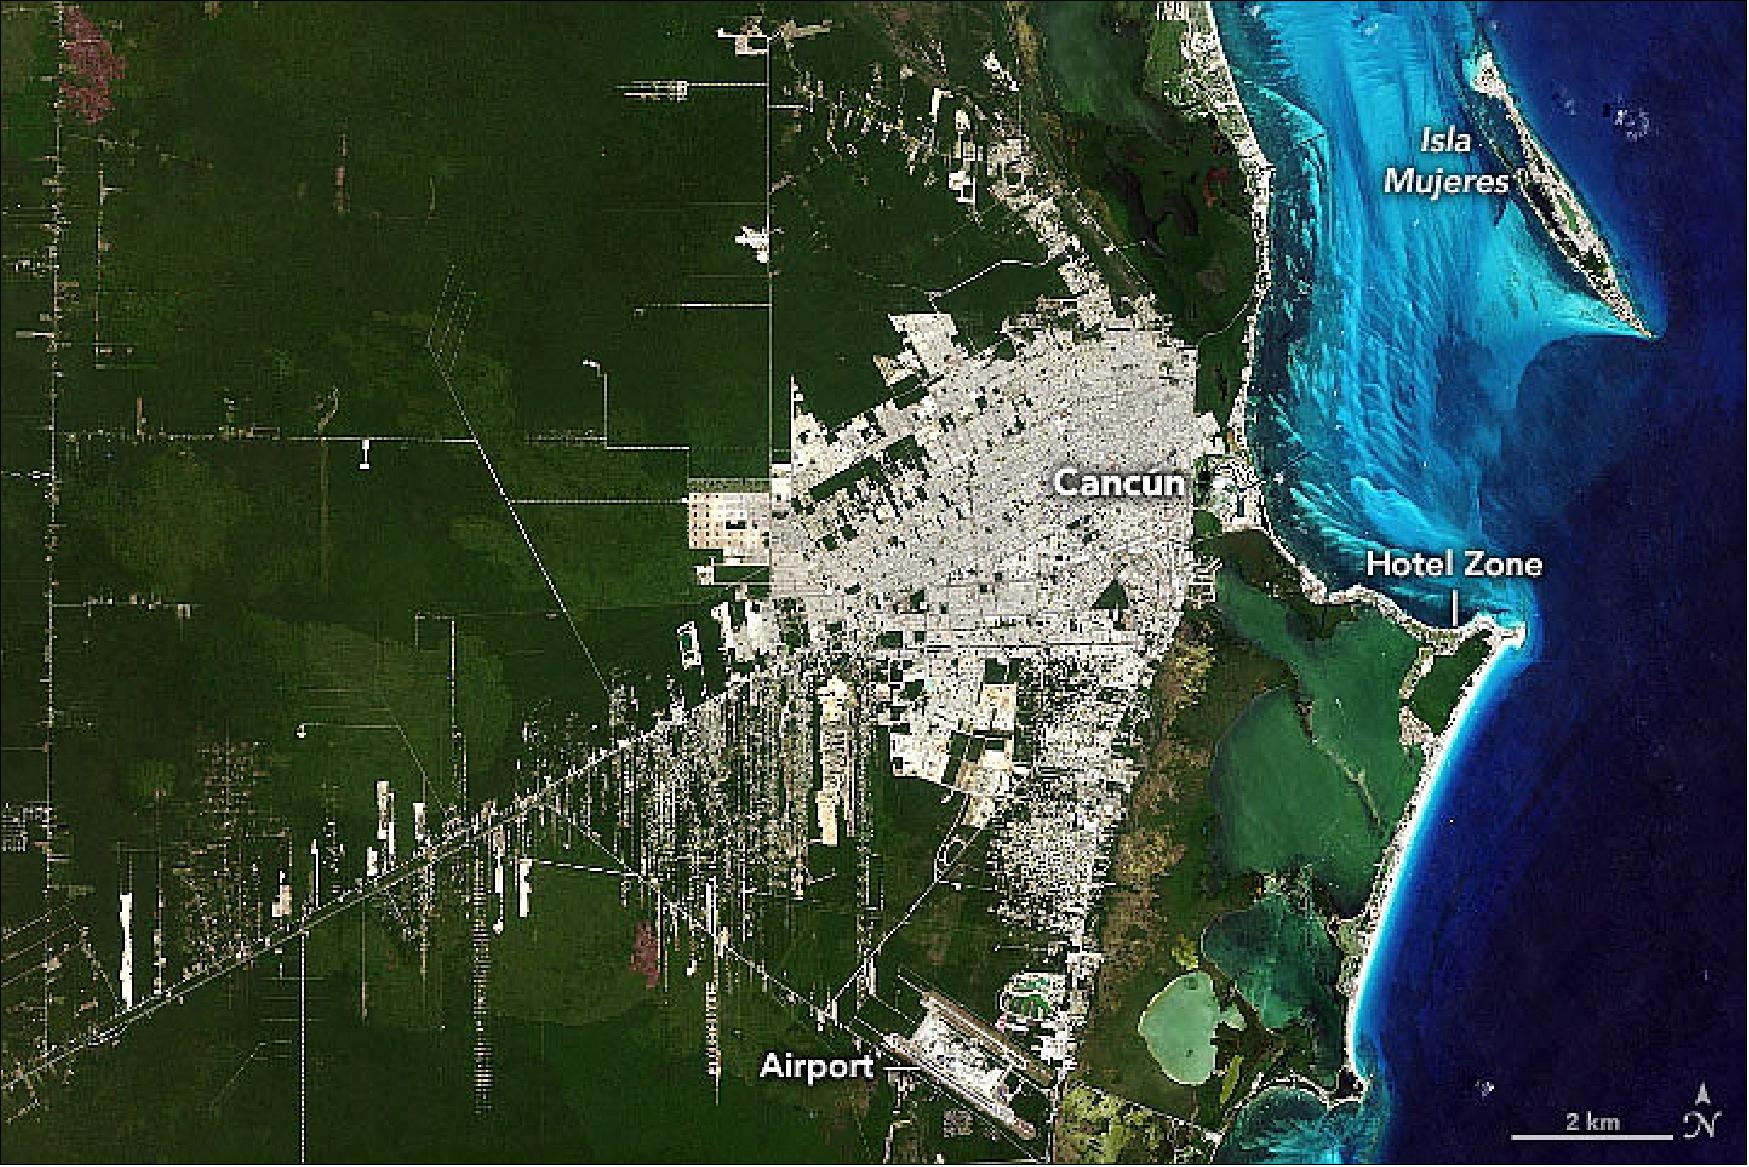 Figure 131: Image of Cancún acquired by the OLI instrument on Landsat-8 on 11 April 2019 (image credit: NASA, image by Allison Nussbaum, using Landsat data from the U.S. Geological Survey. Story by Kasha Patel)